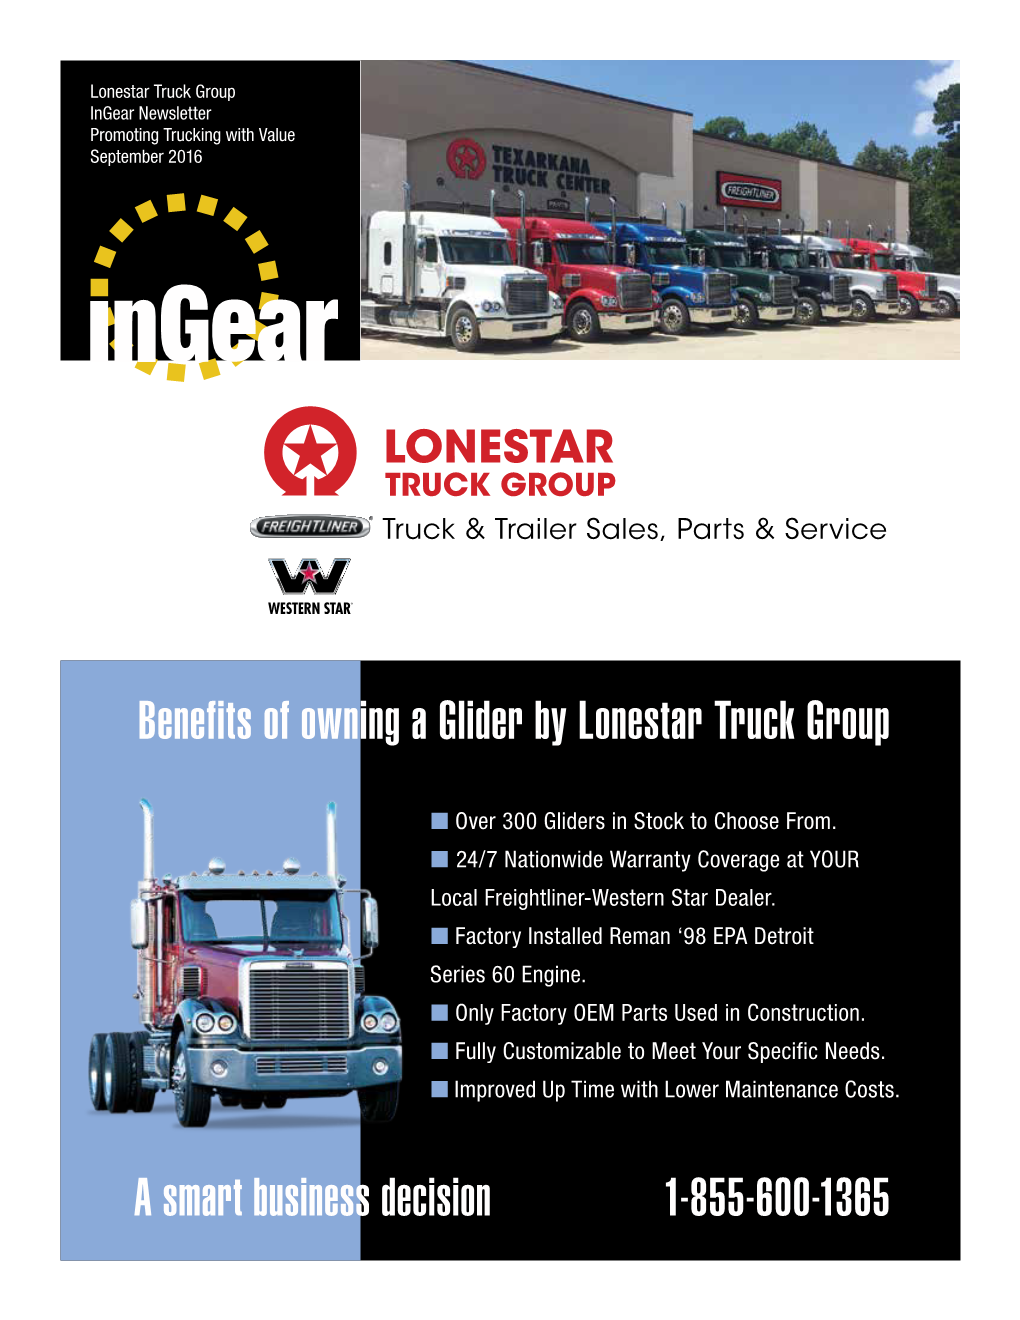 Benefits of Owning a Glider by Lonestar Truck Group